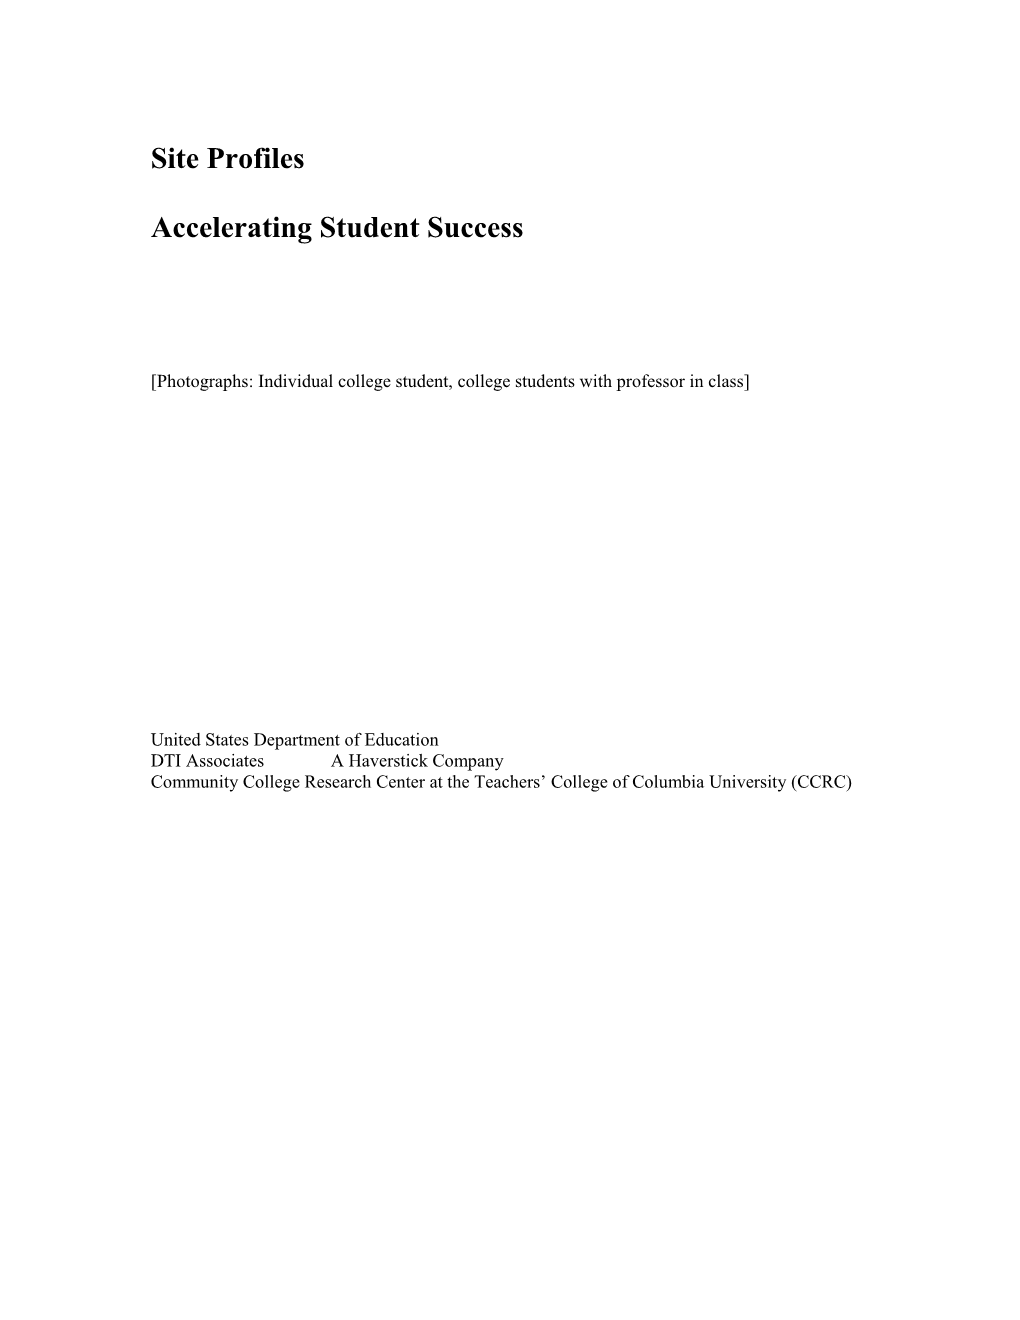 Site Profiles: Accelerating Student Success (MS Word)